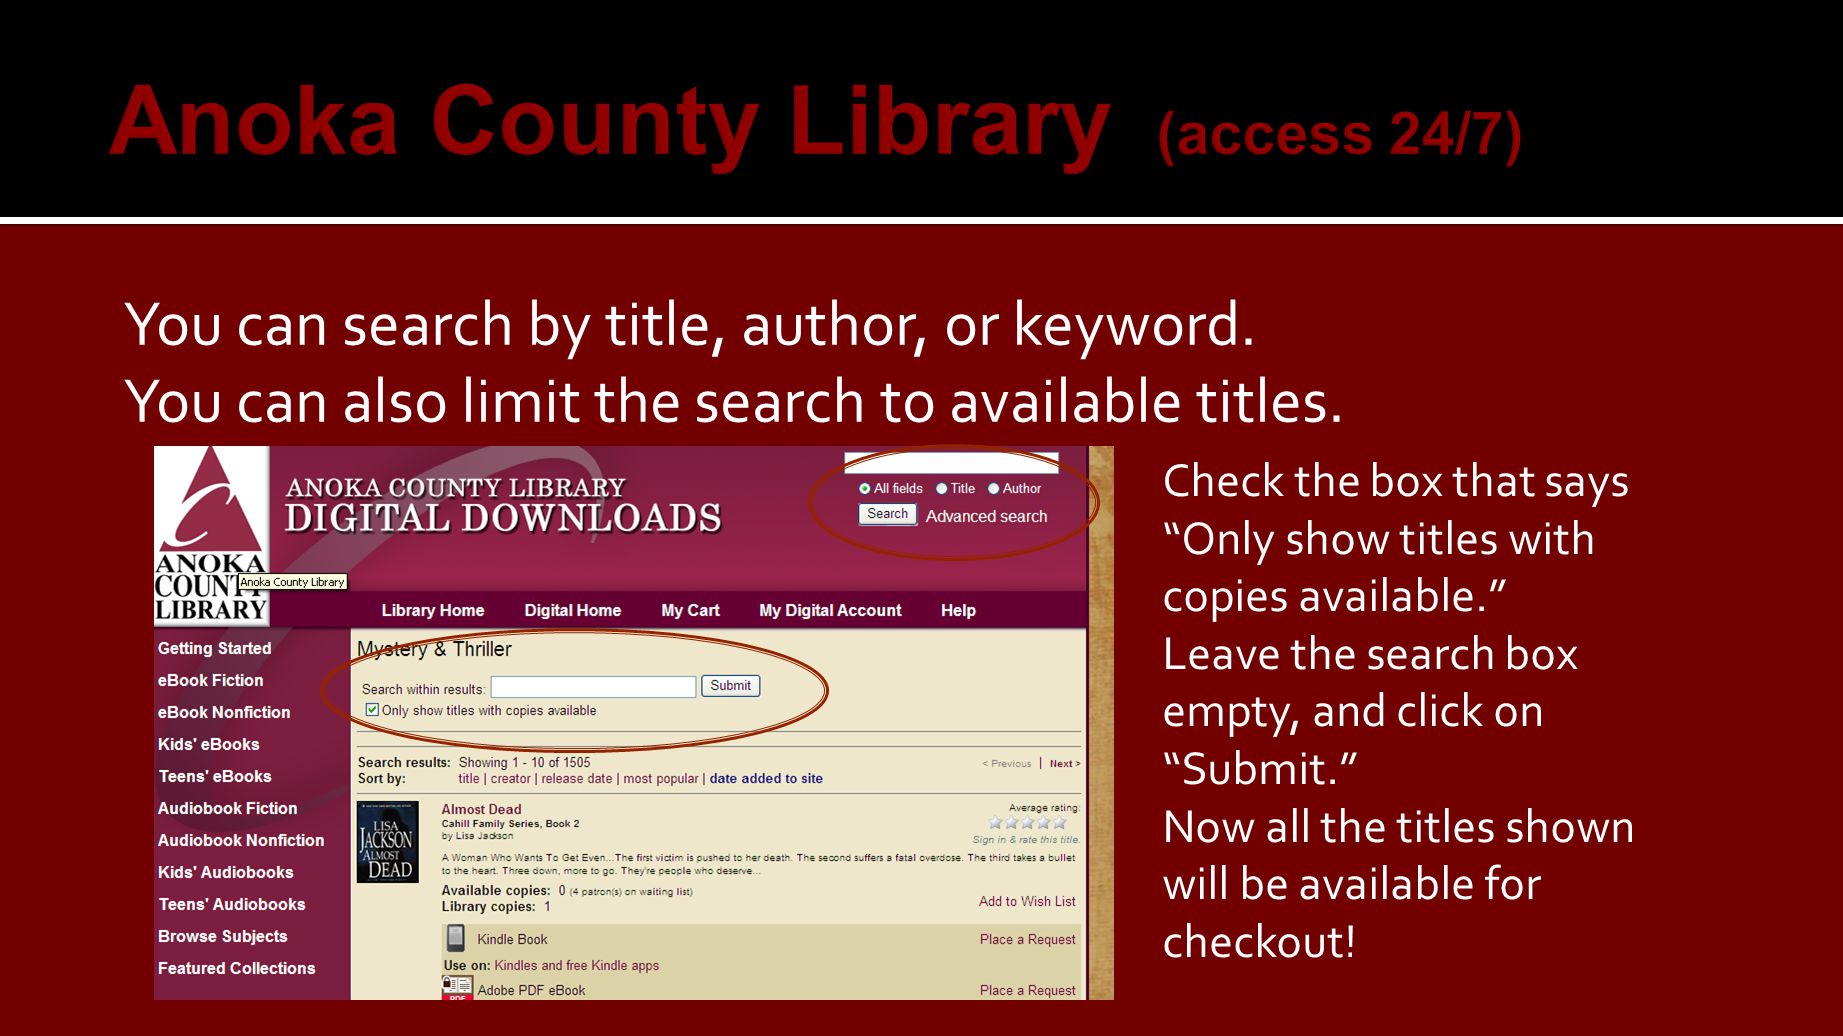 You can search by title, author, or keyword. You can also limit the search to available titles.